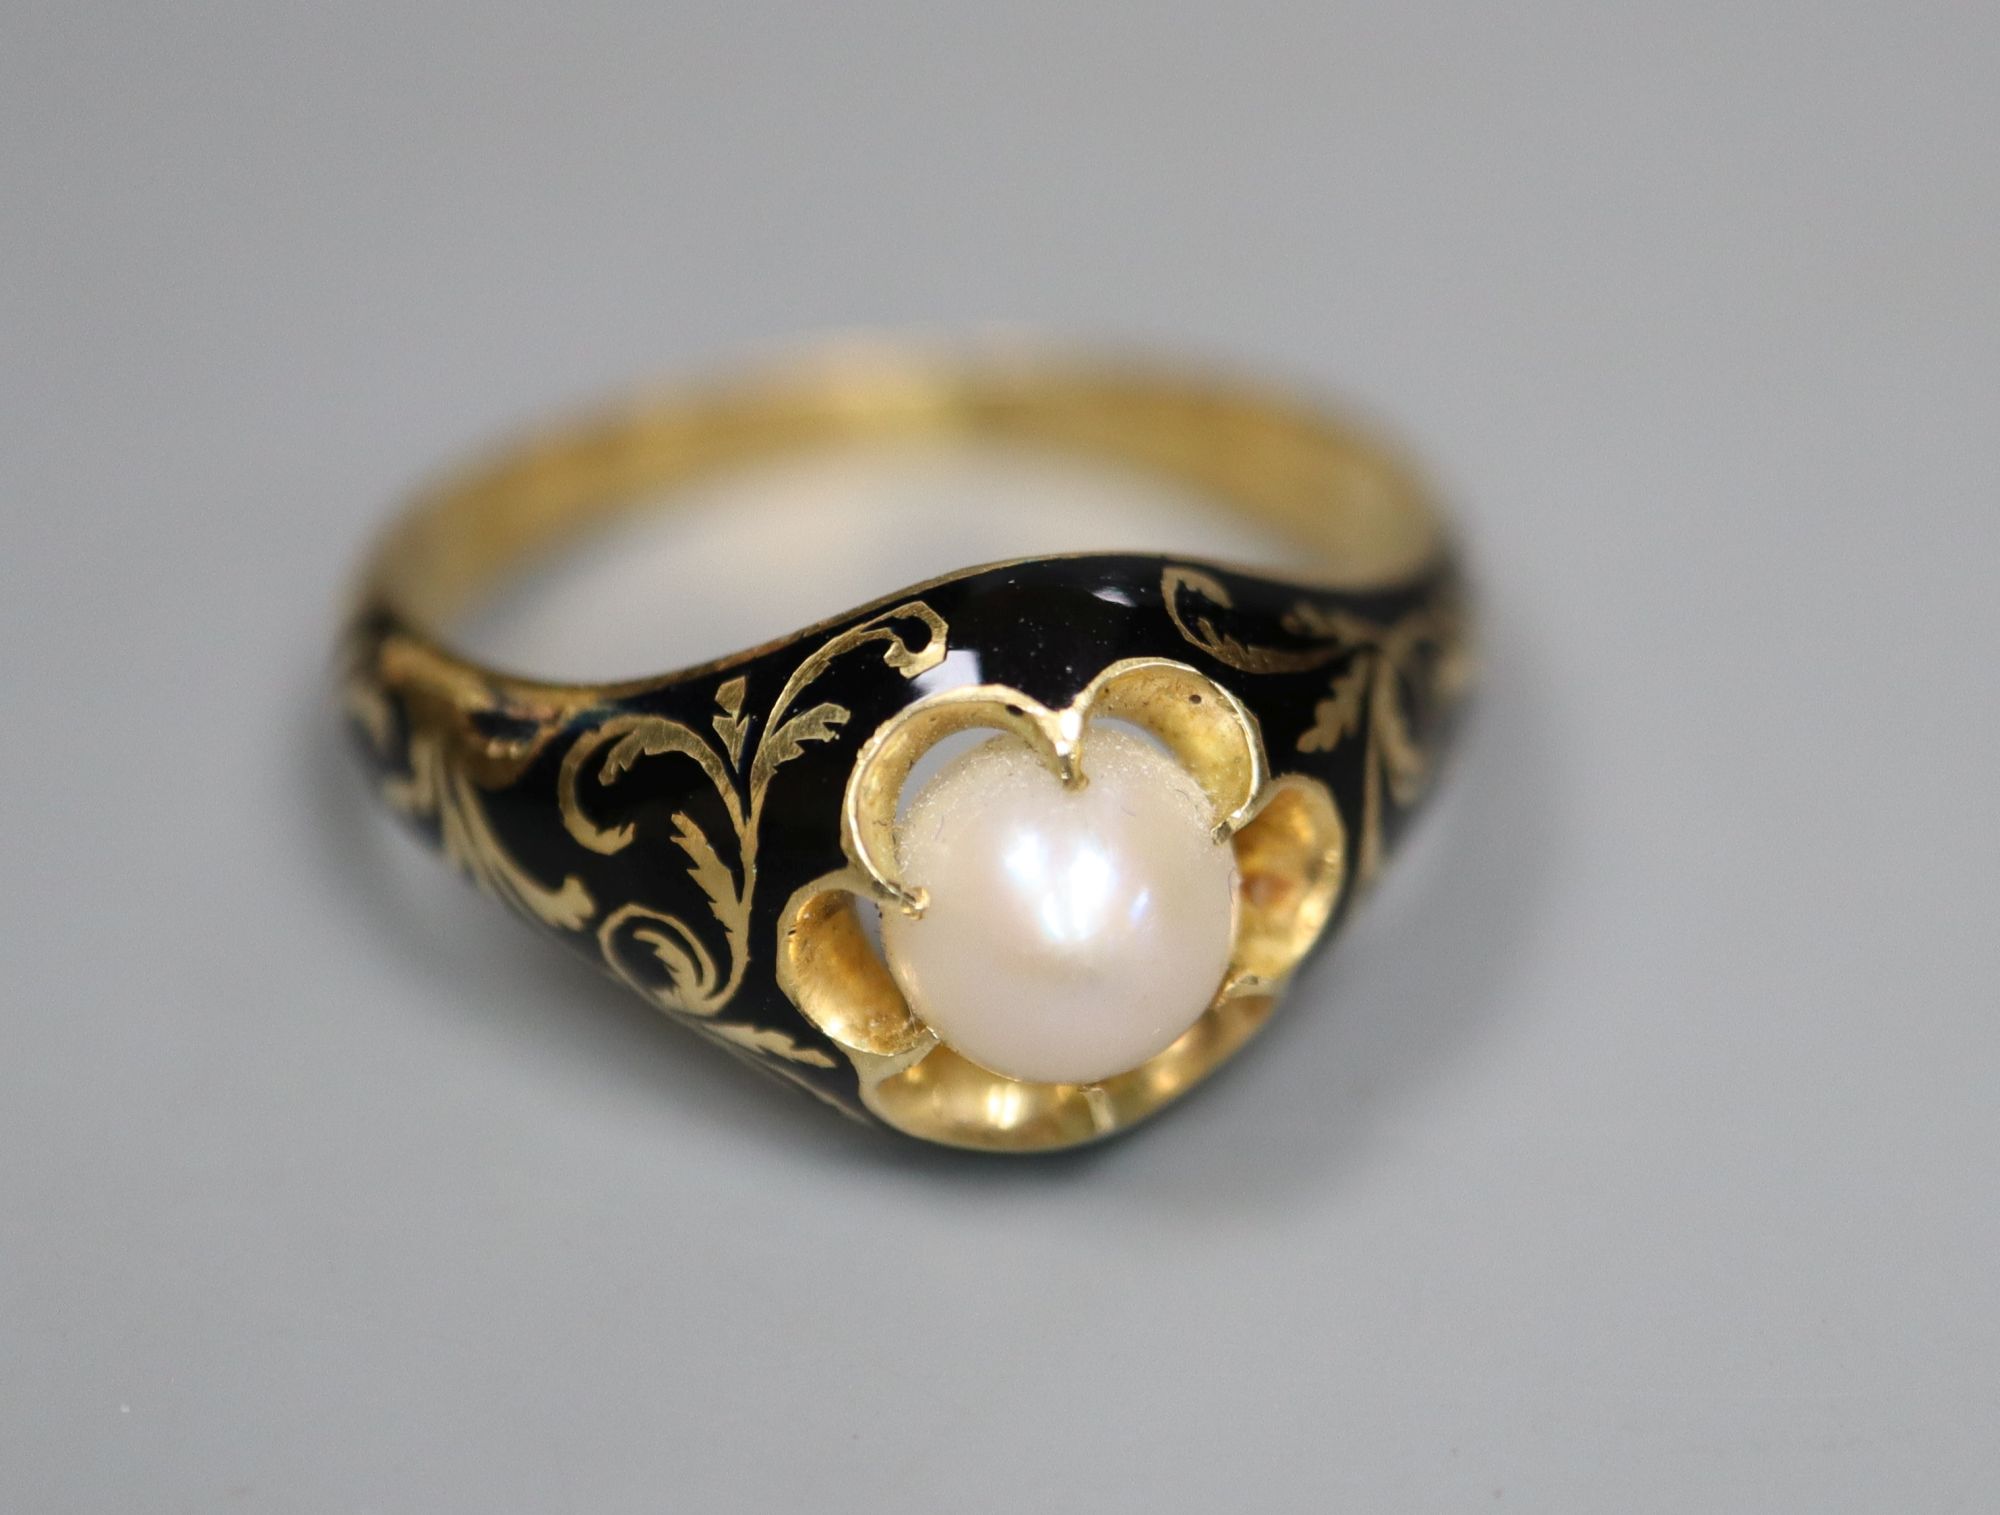 A Victorian 18ct gold, black enamel and pearl memorial ring, gross 3.7 grams, size Q.